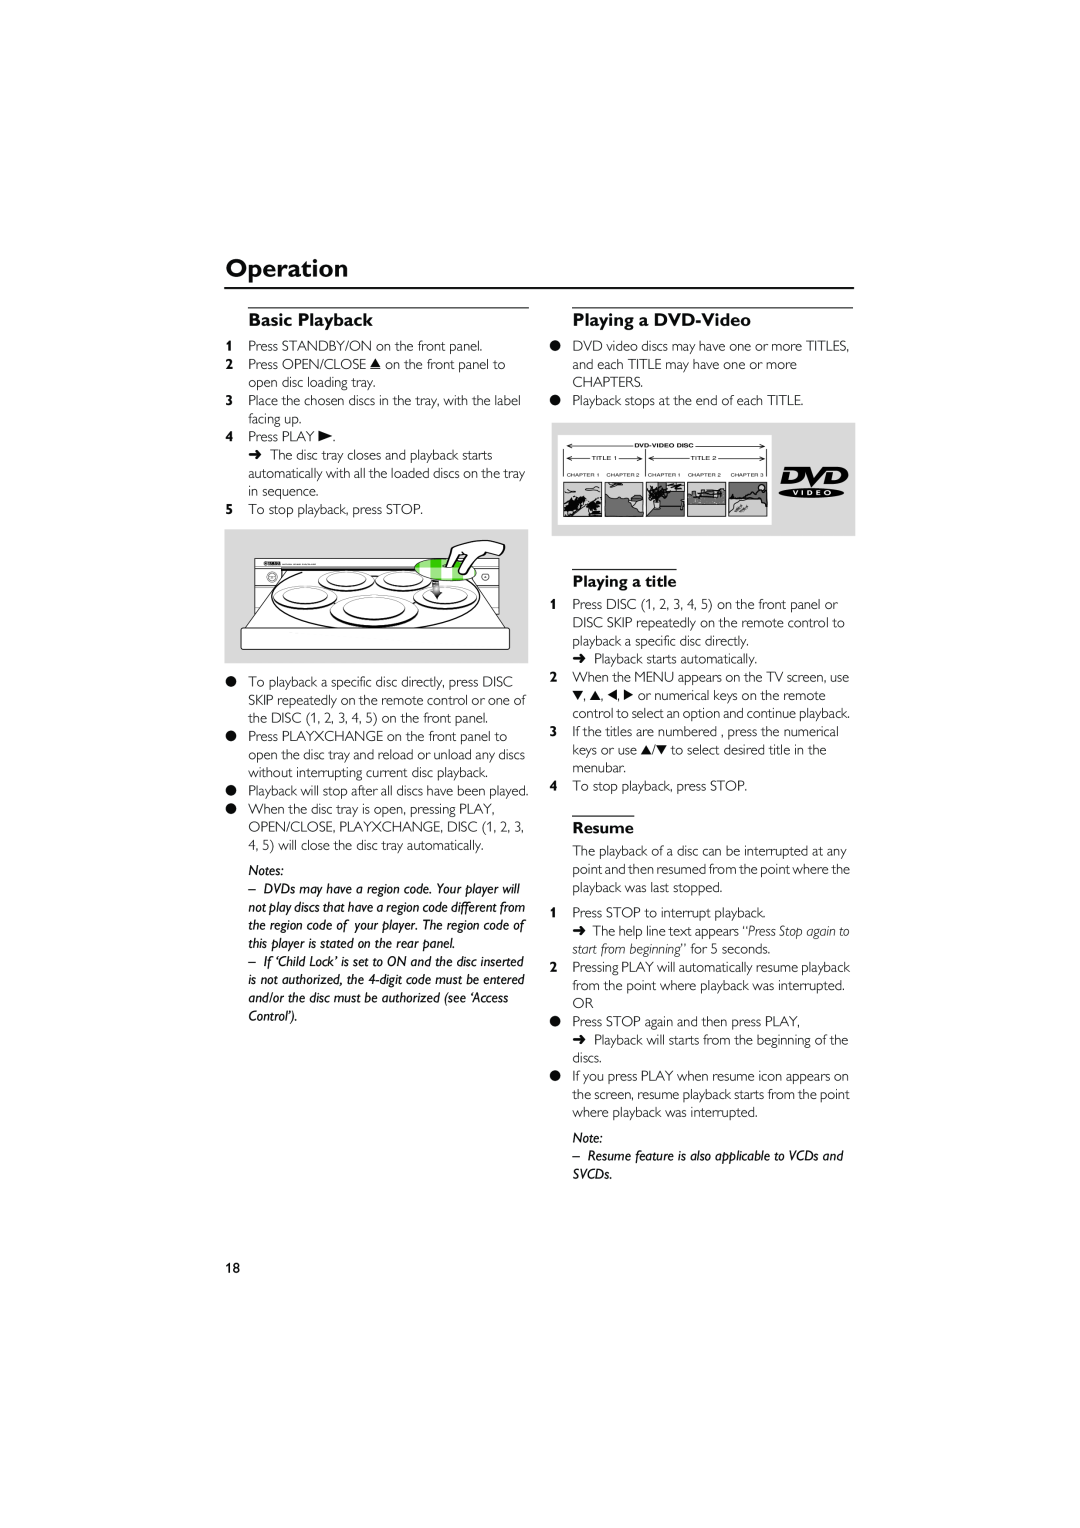 Yamaha DVD-C940 owner manual Operation, Basic Playback, Playing a DVD-Video, Playing a title, Resume 